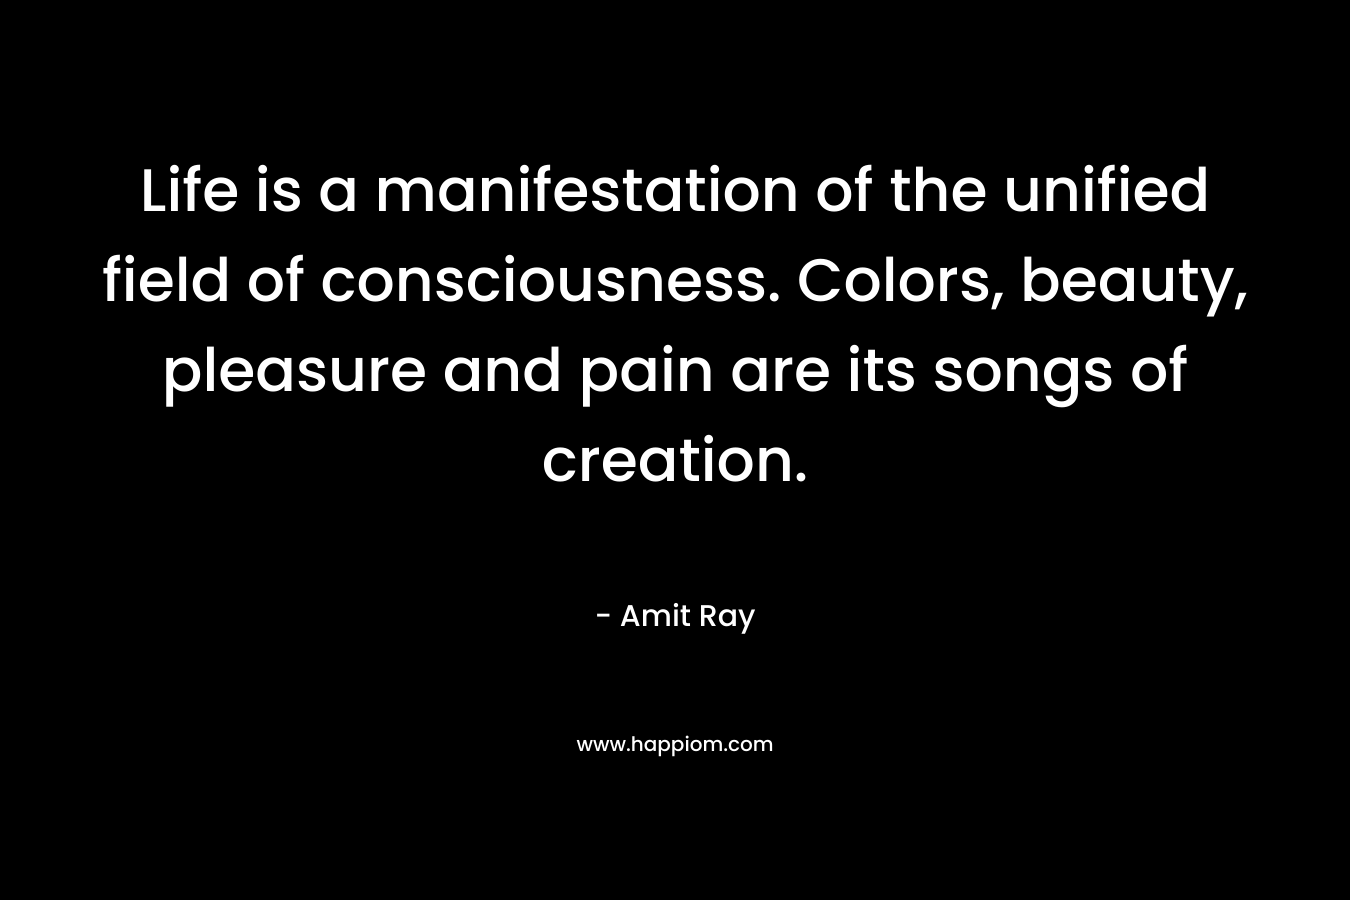 Life is a manifestation of the unified field of consciousness. Colors, beauty, pleasure and pain are its songs of creation.